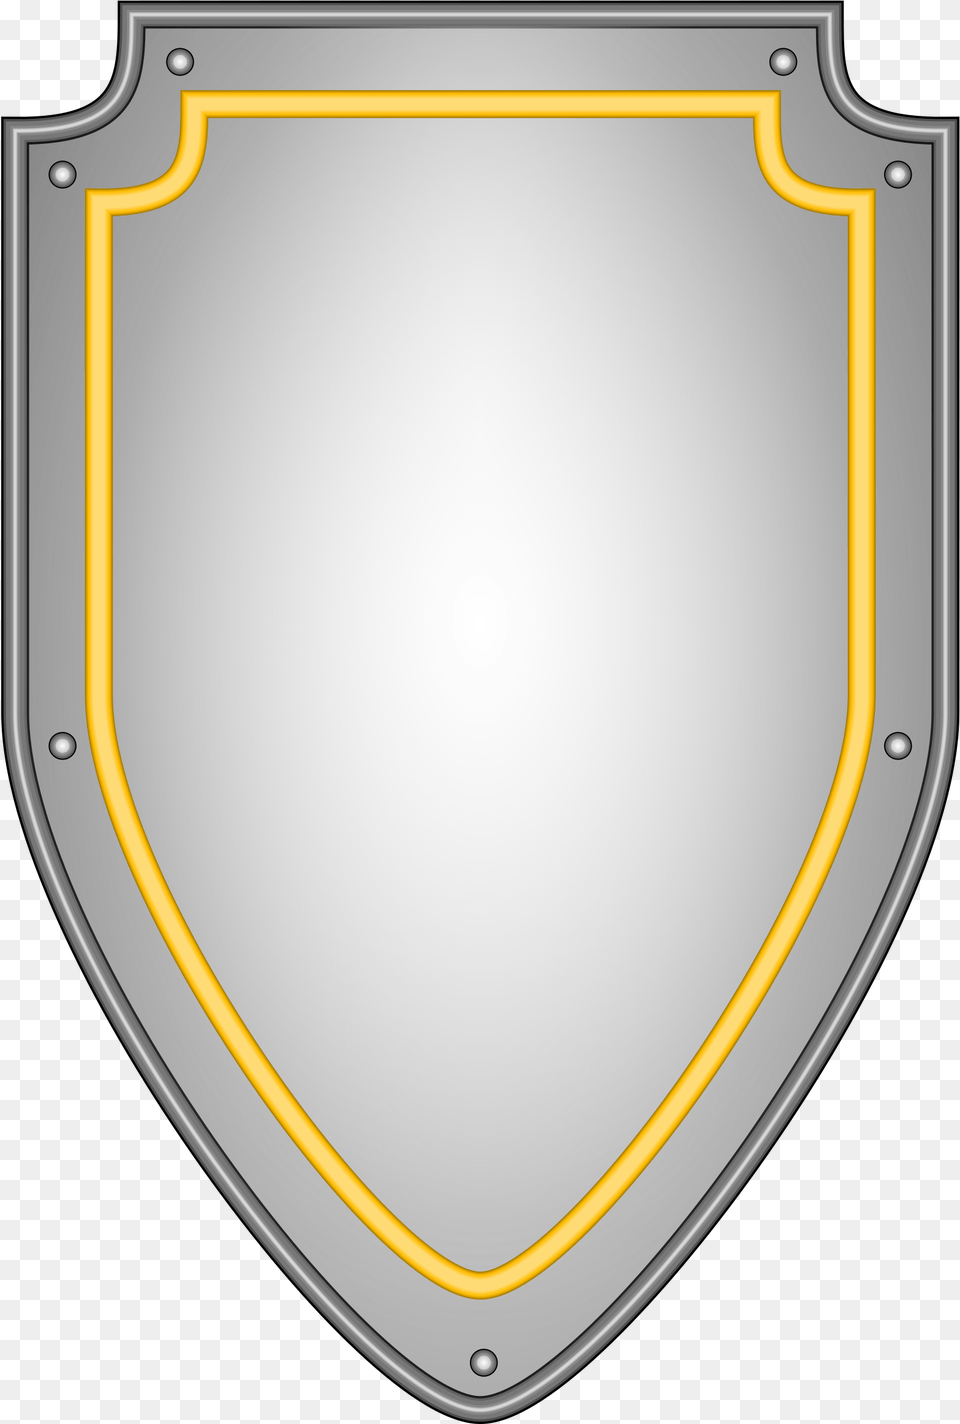 Download Shield Picture Knight Shield Clipart, Armor, White Board Png Image